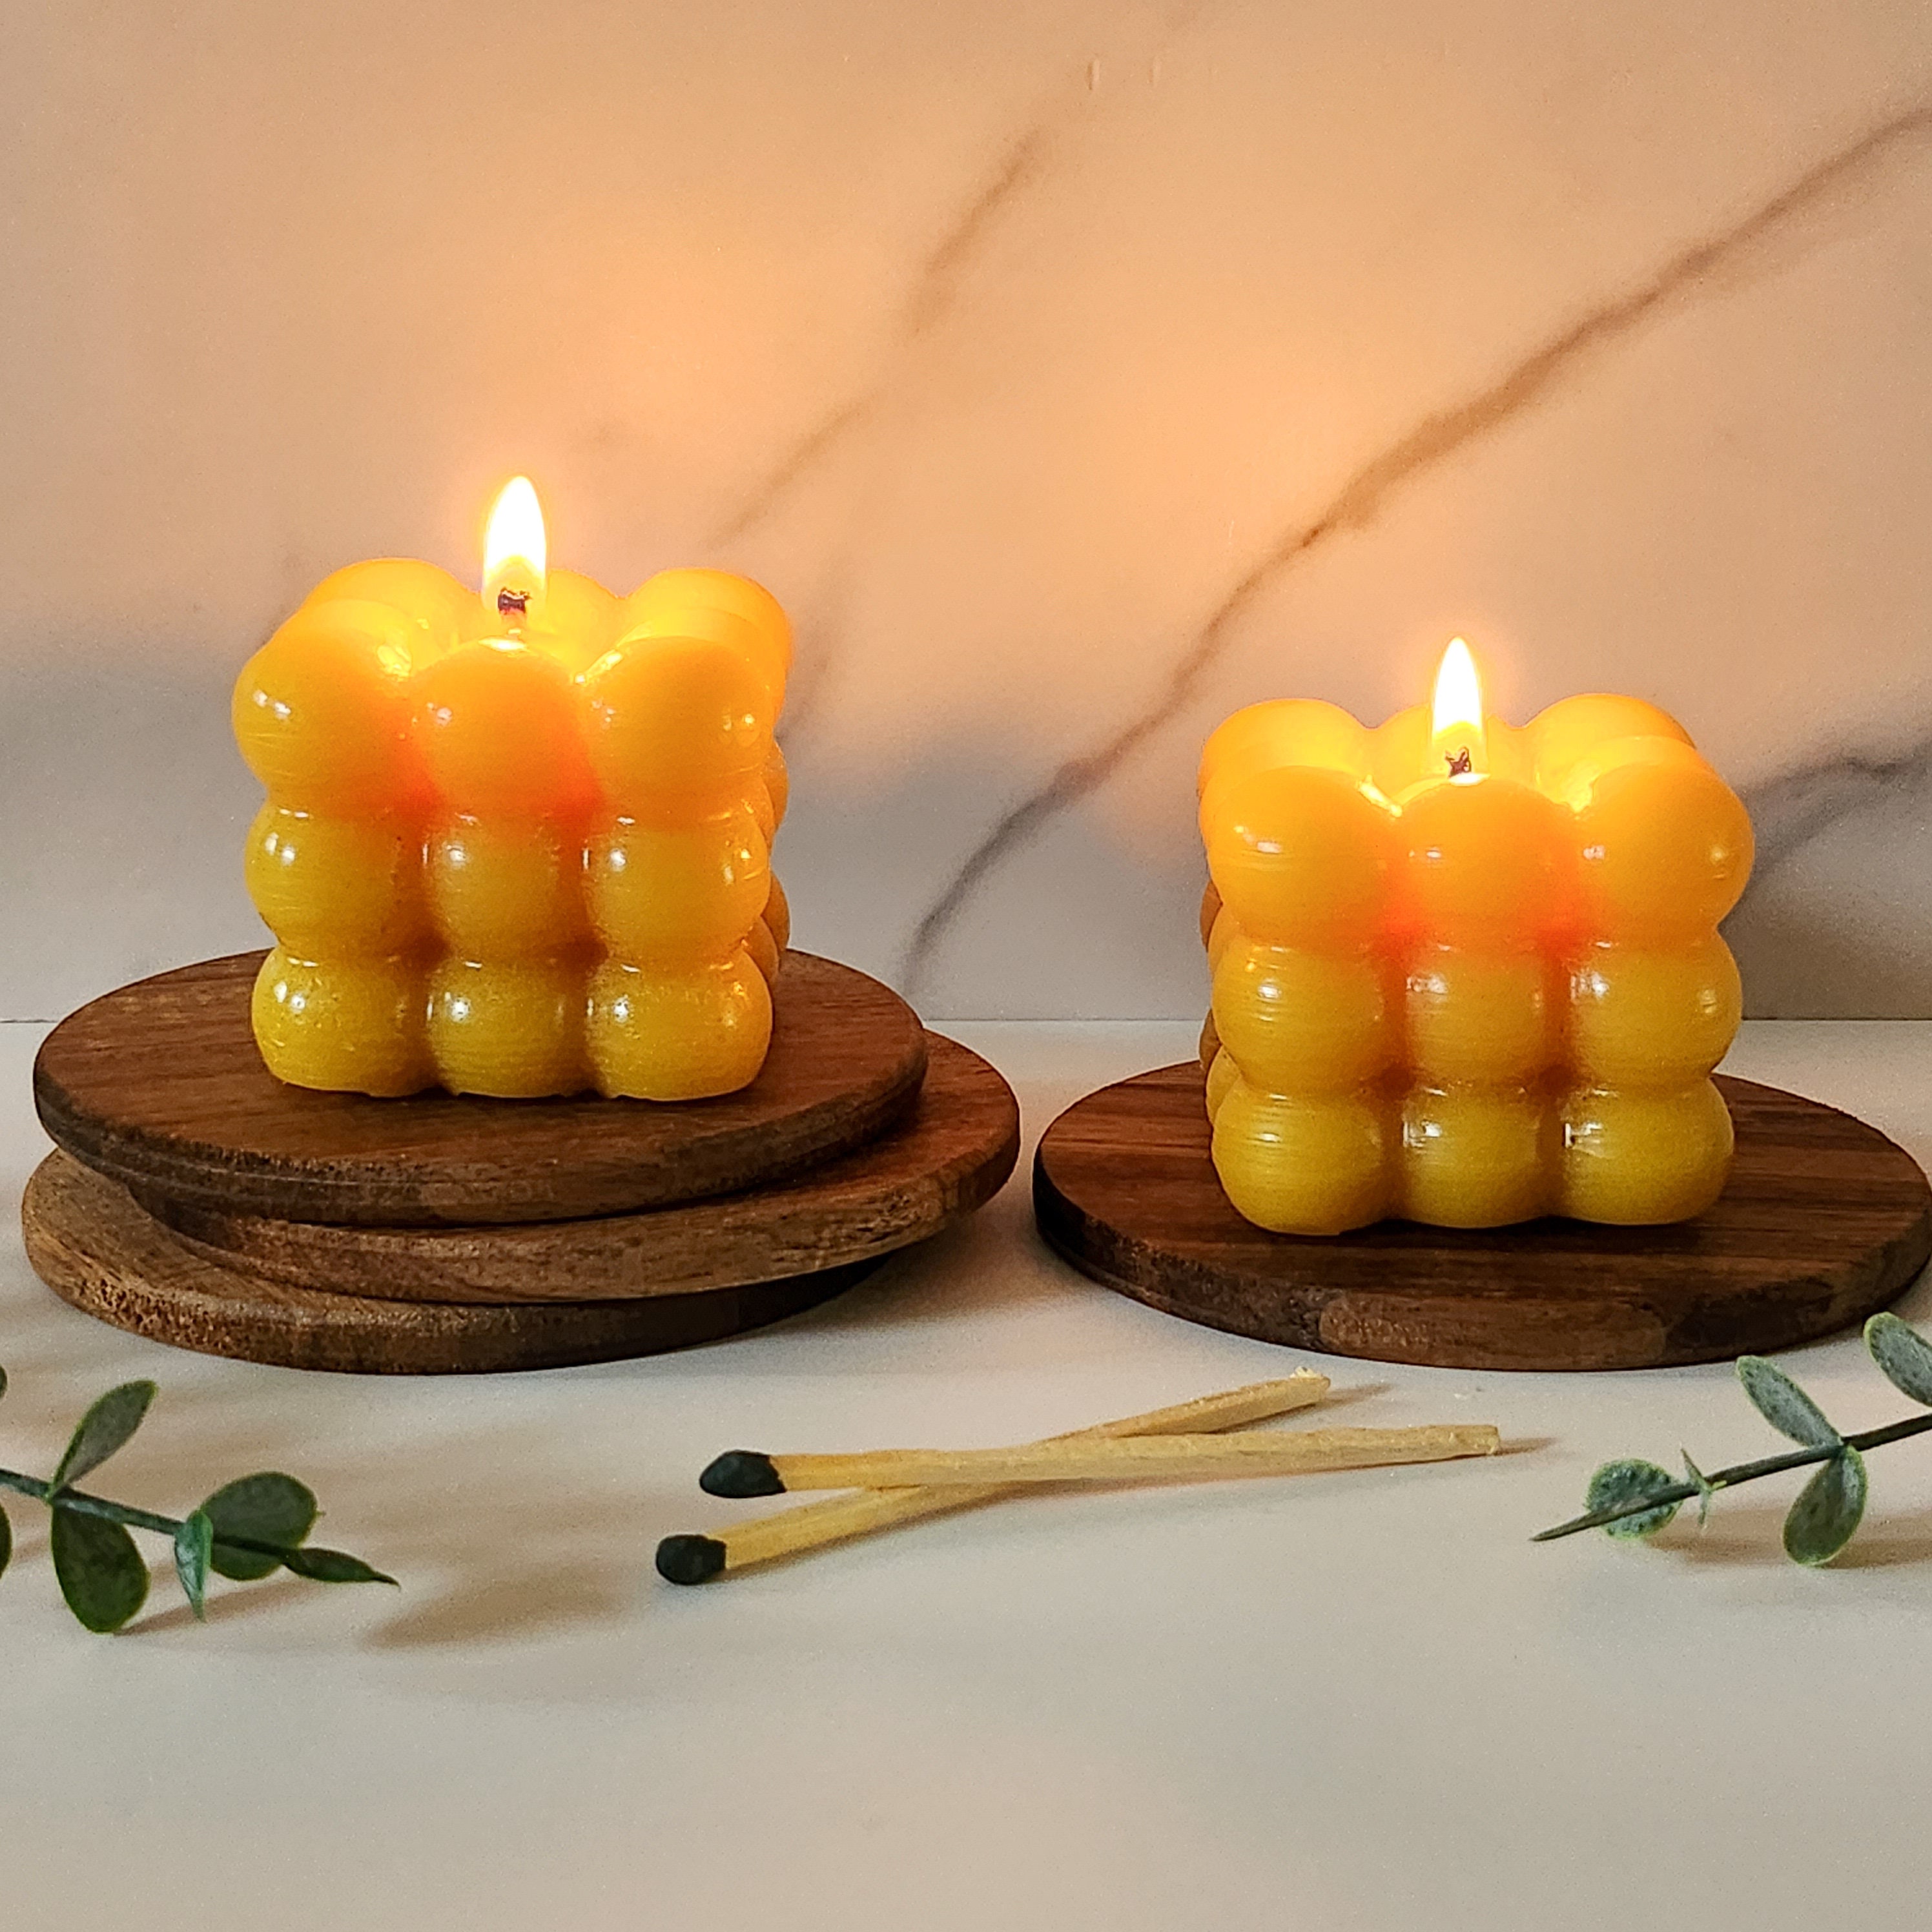 Lavender Pure Beeswax Candle – The Bath and Wick Shop